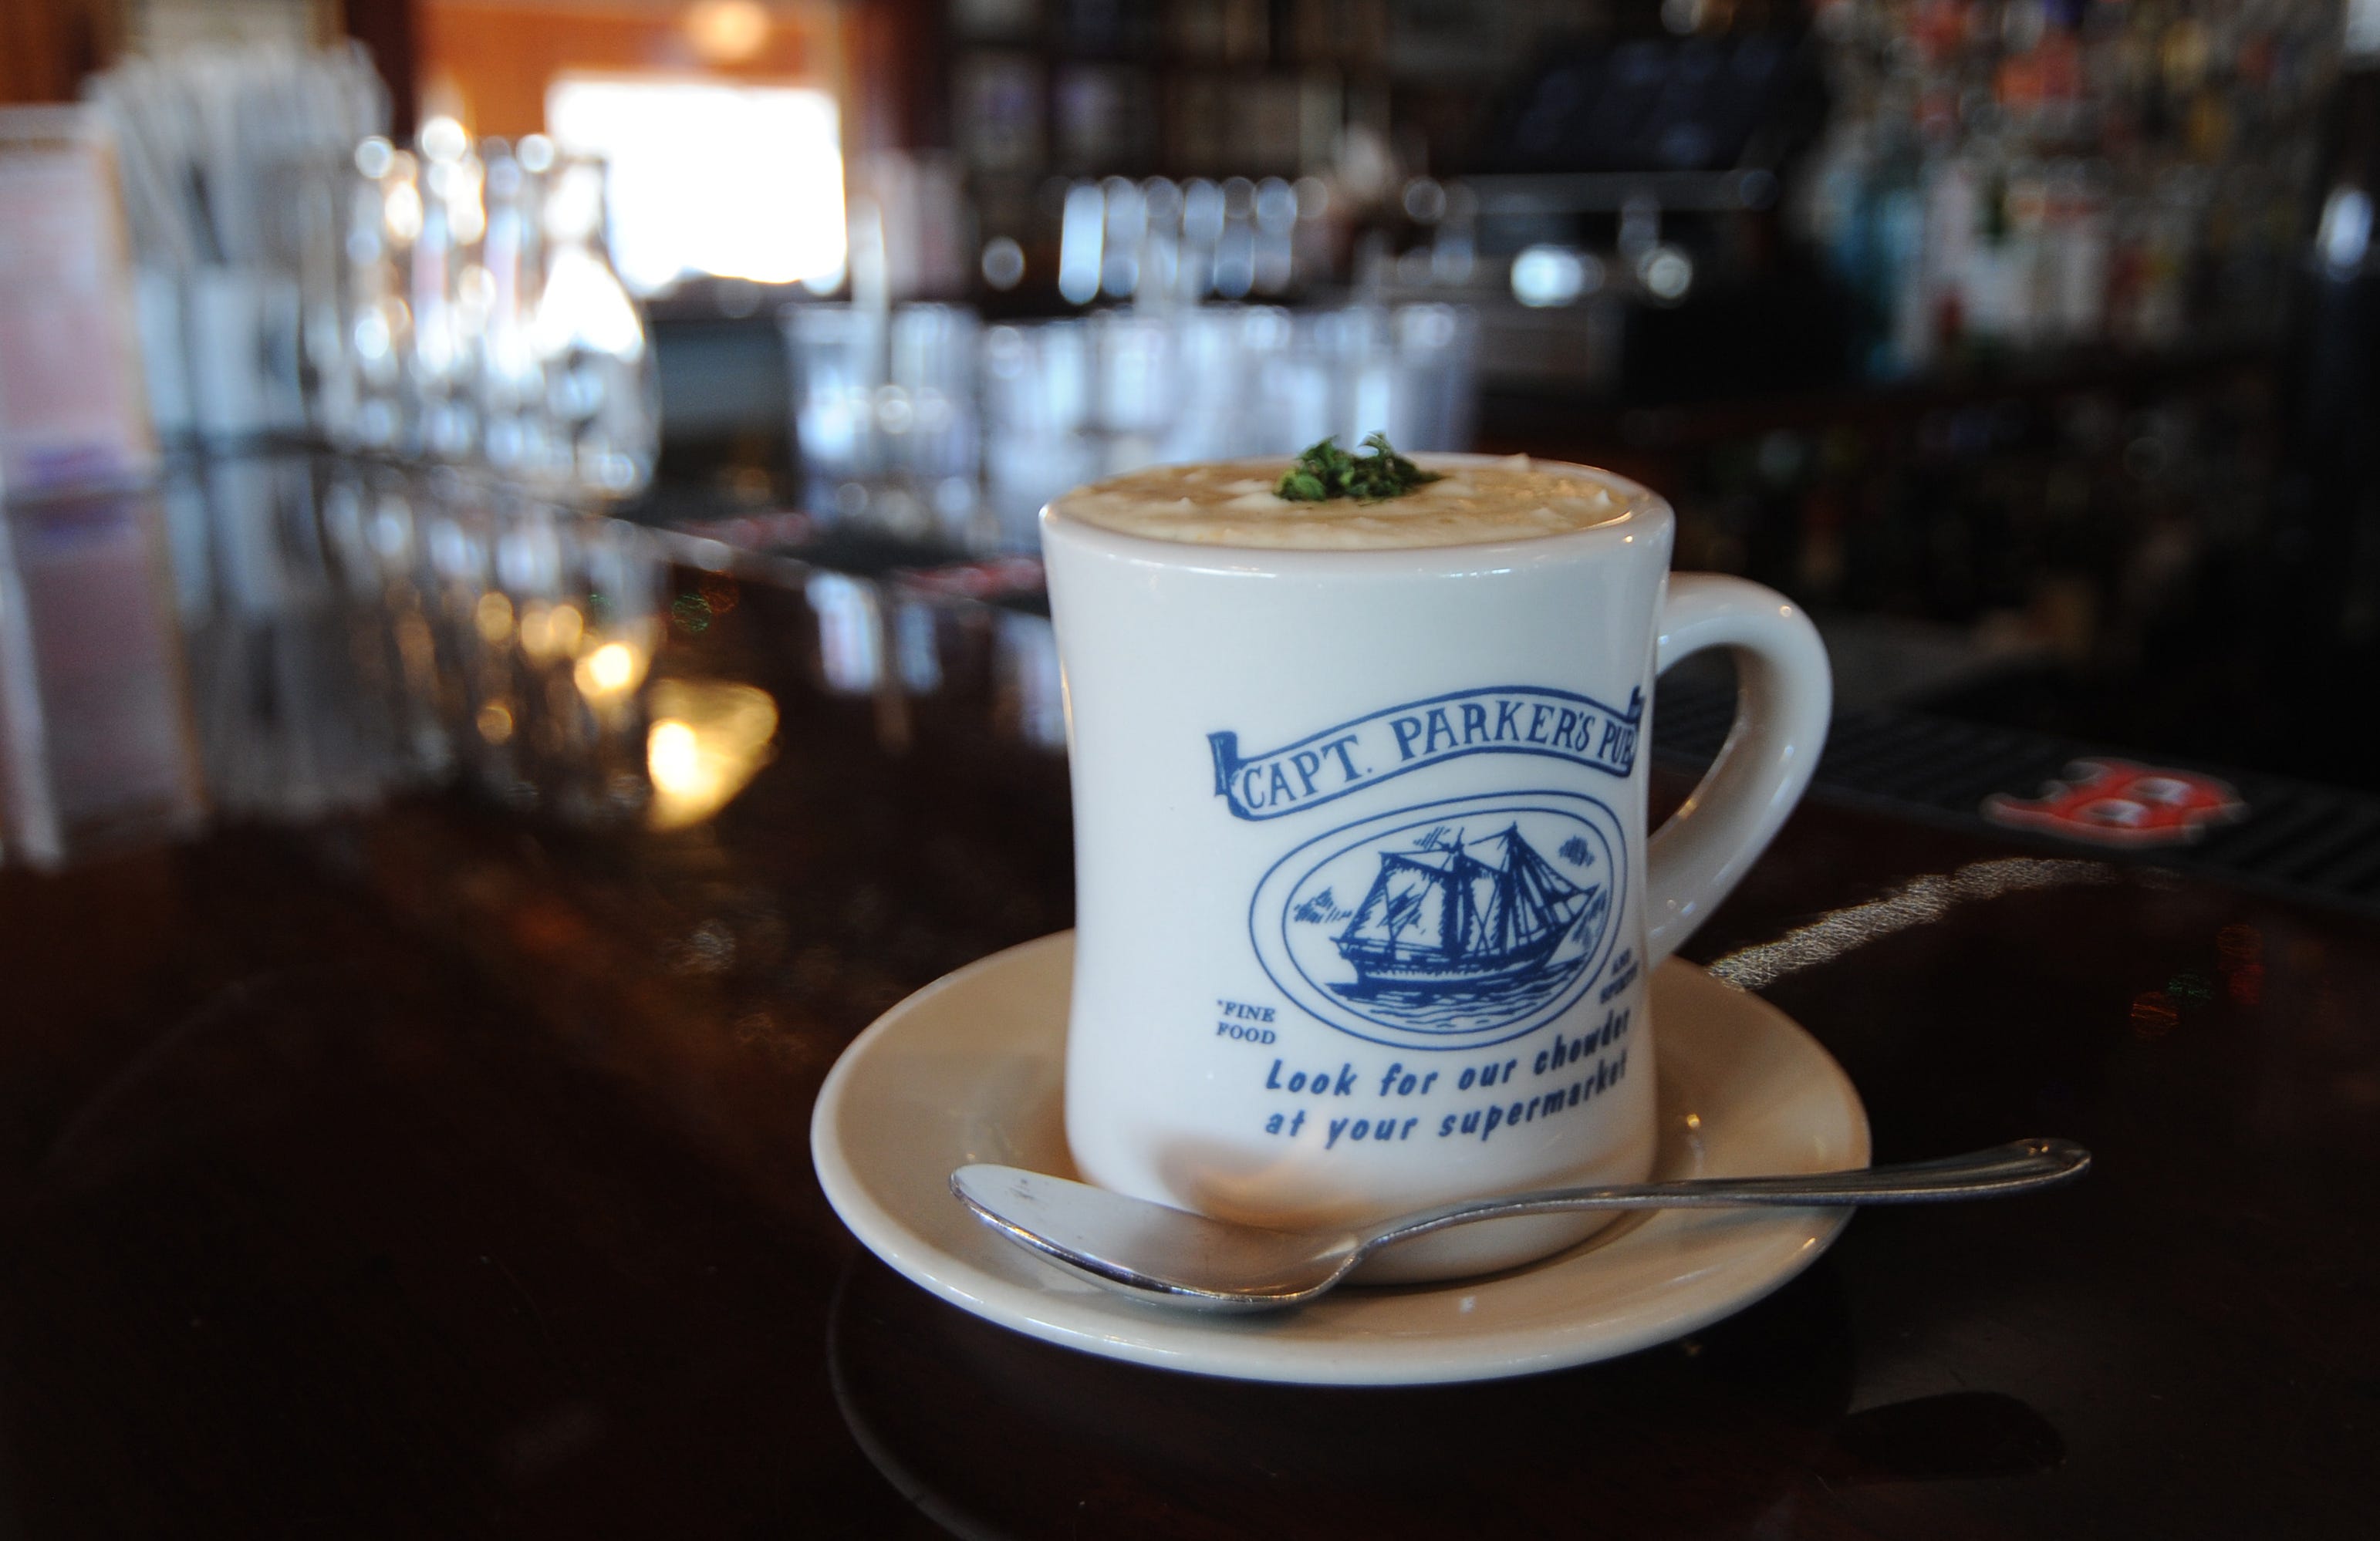 A white mug that has the Captain Parker logo on it filled to overflowing with New England clam chowder in the foreground with an out-of-focus bar in the background